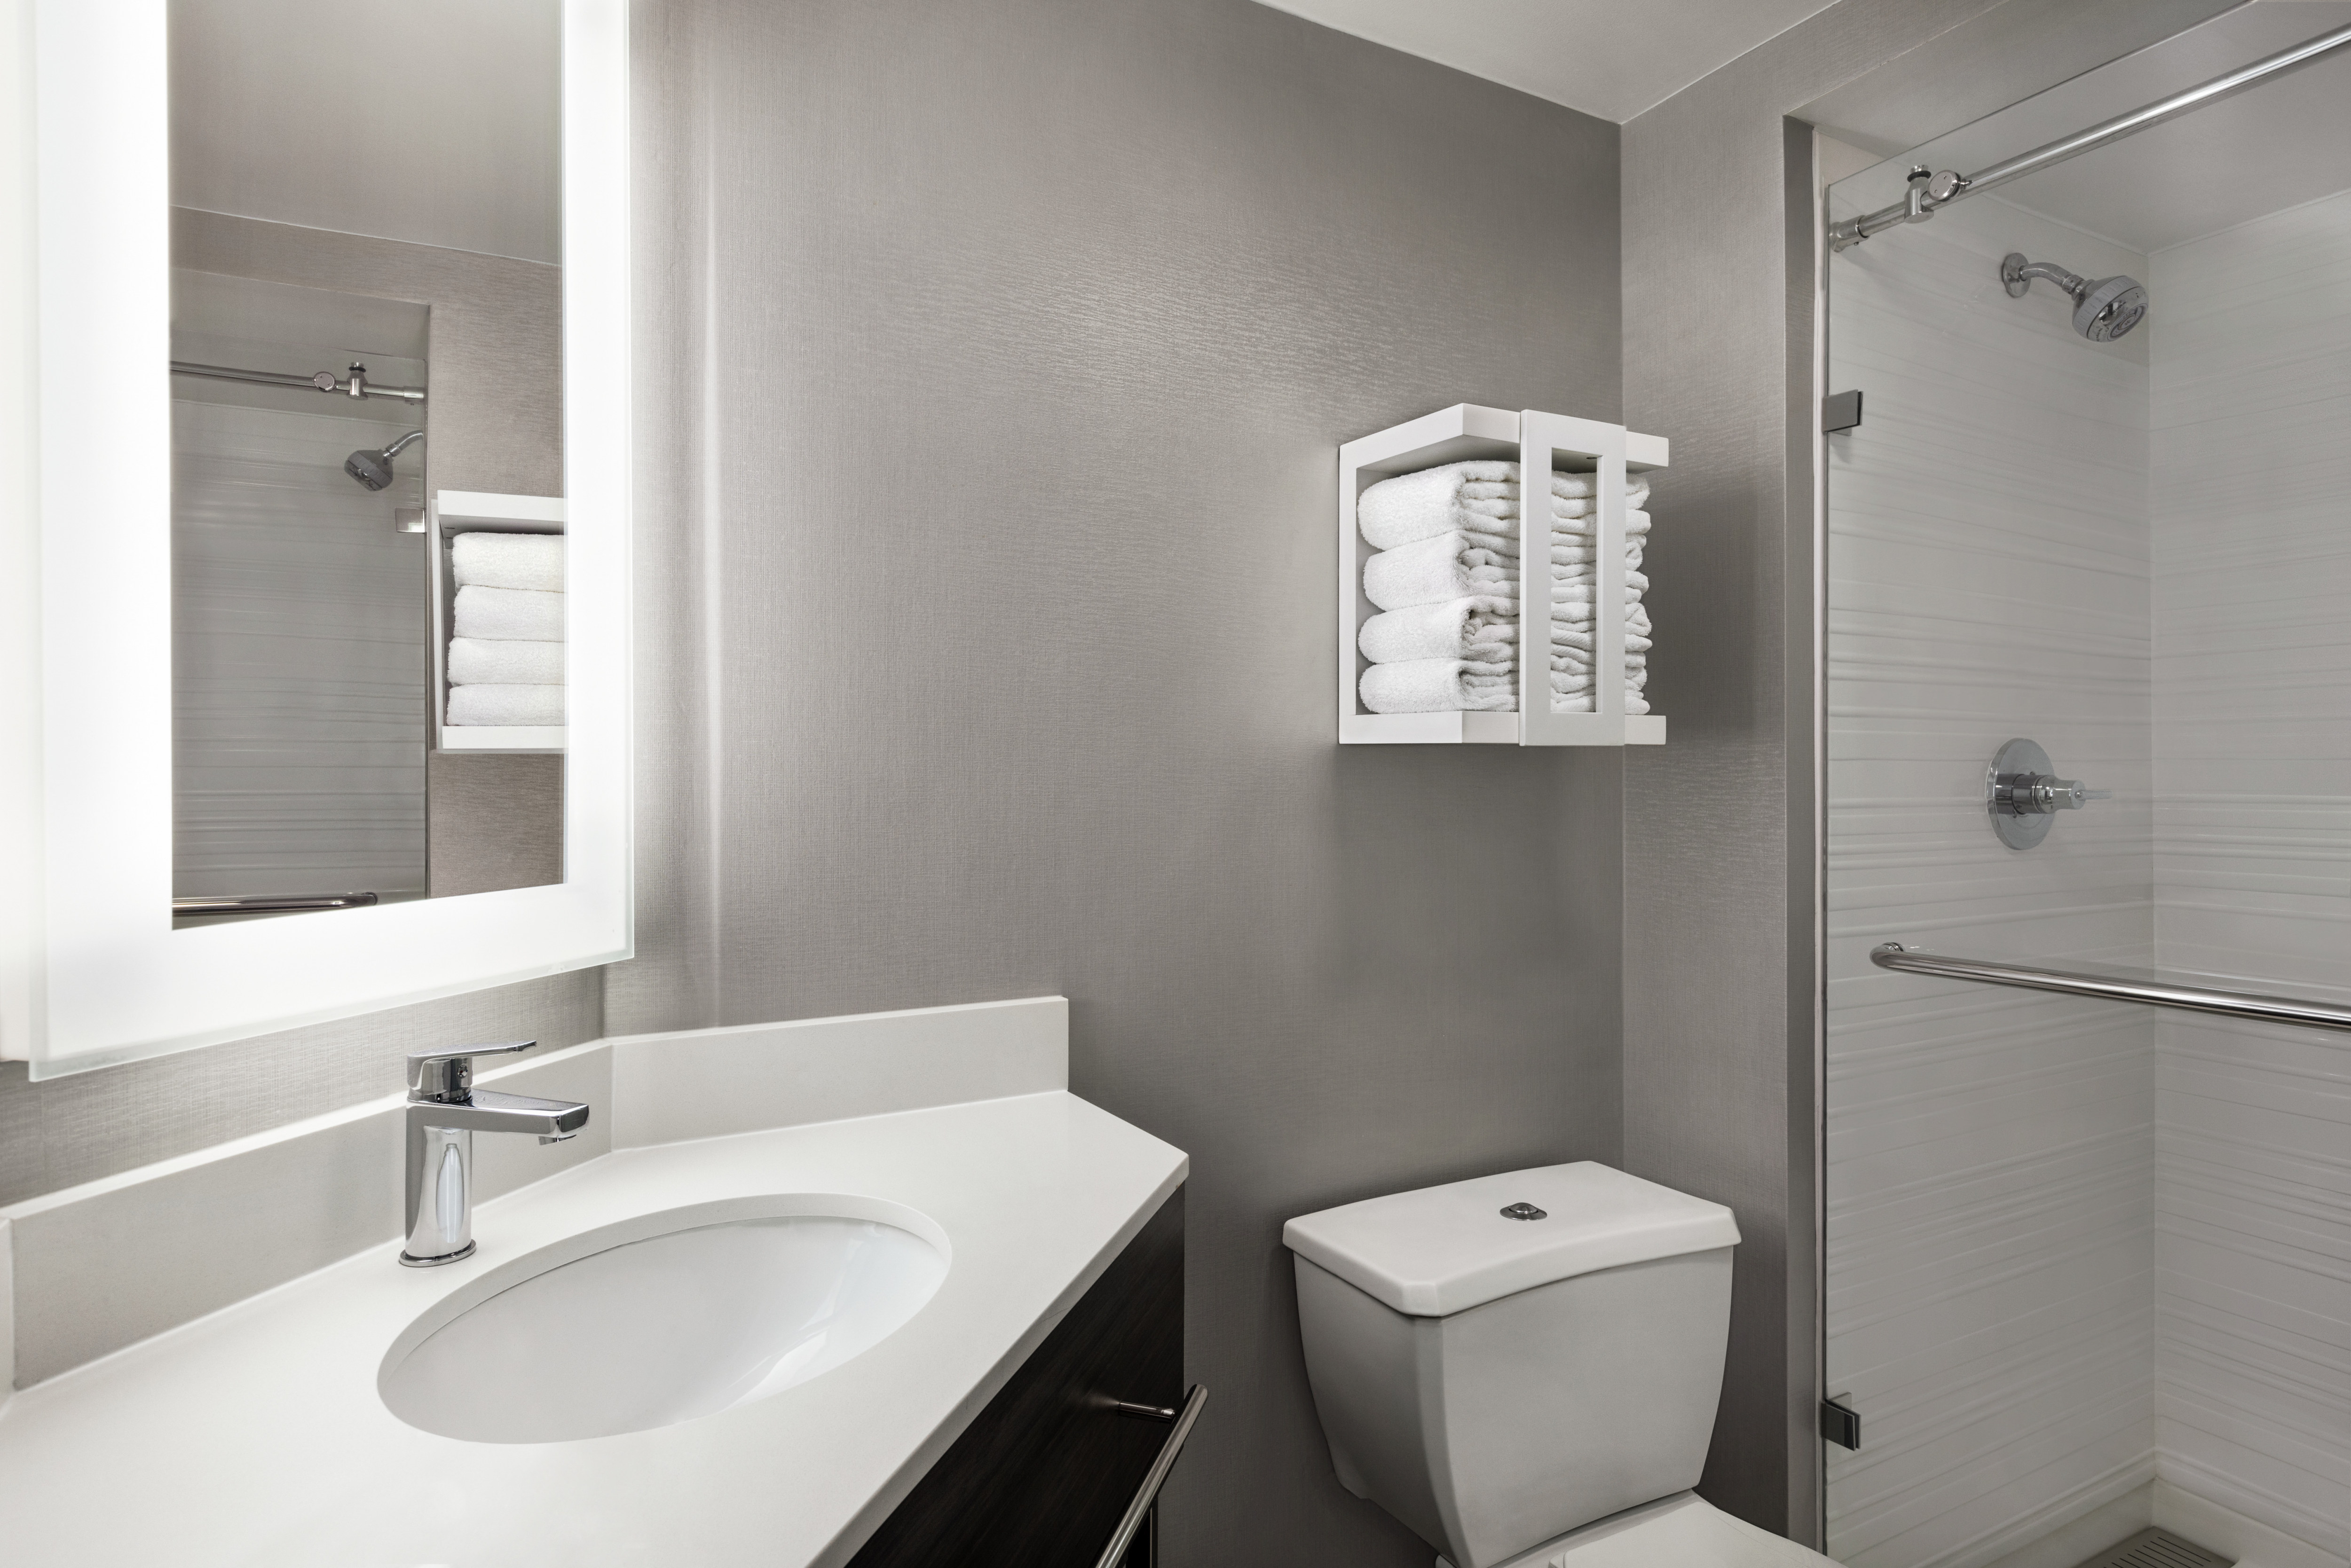 Ample view of vanity, facilities and storage for towels.